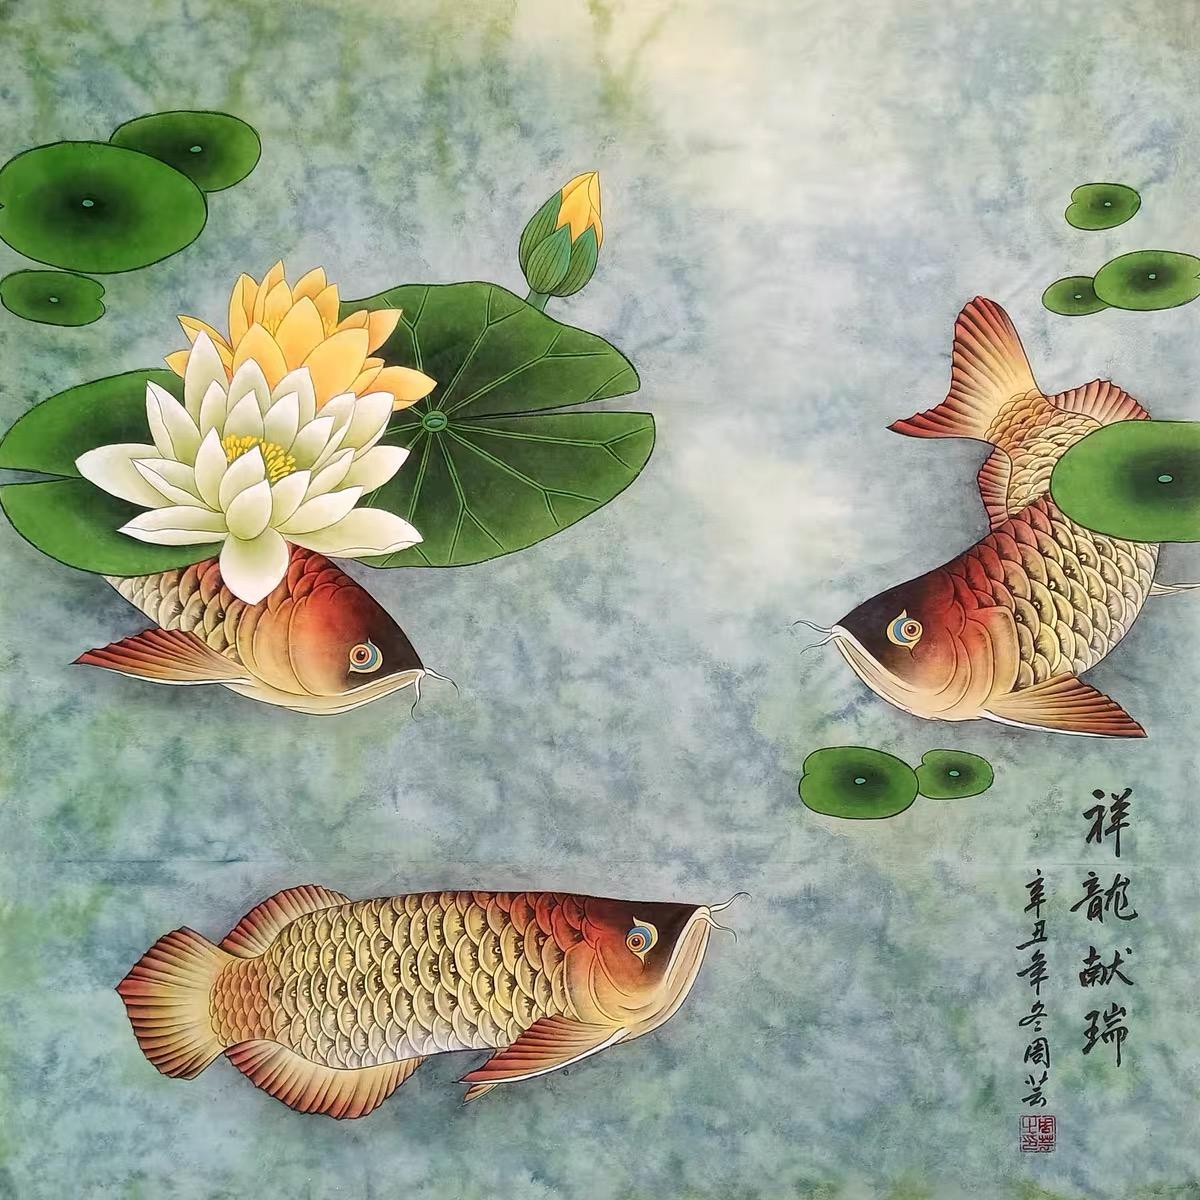 This Chinese Classic Ink Hand Painting Auspicious Fishes Lotus Flowers is with very good meaning.

In Chinese culture, fish symbolize abundance, prosperity, and good fortune. Depicting fishes swimming gracefully in the painting signifies wishes for